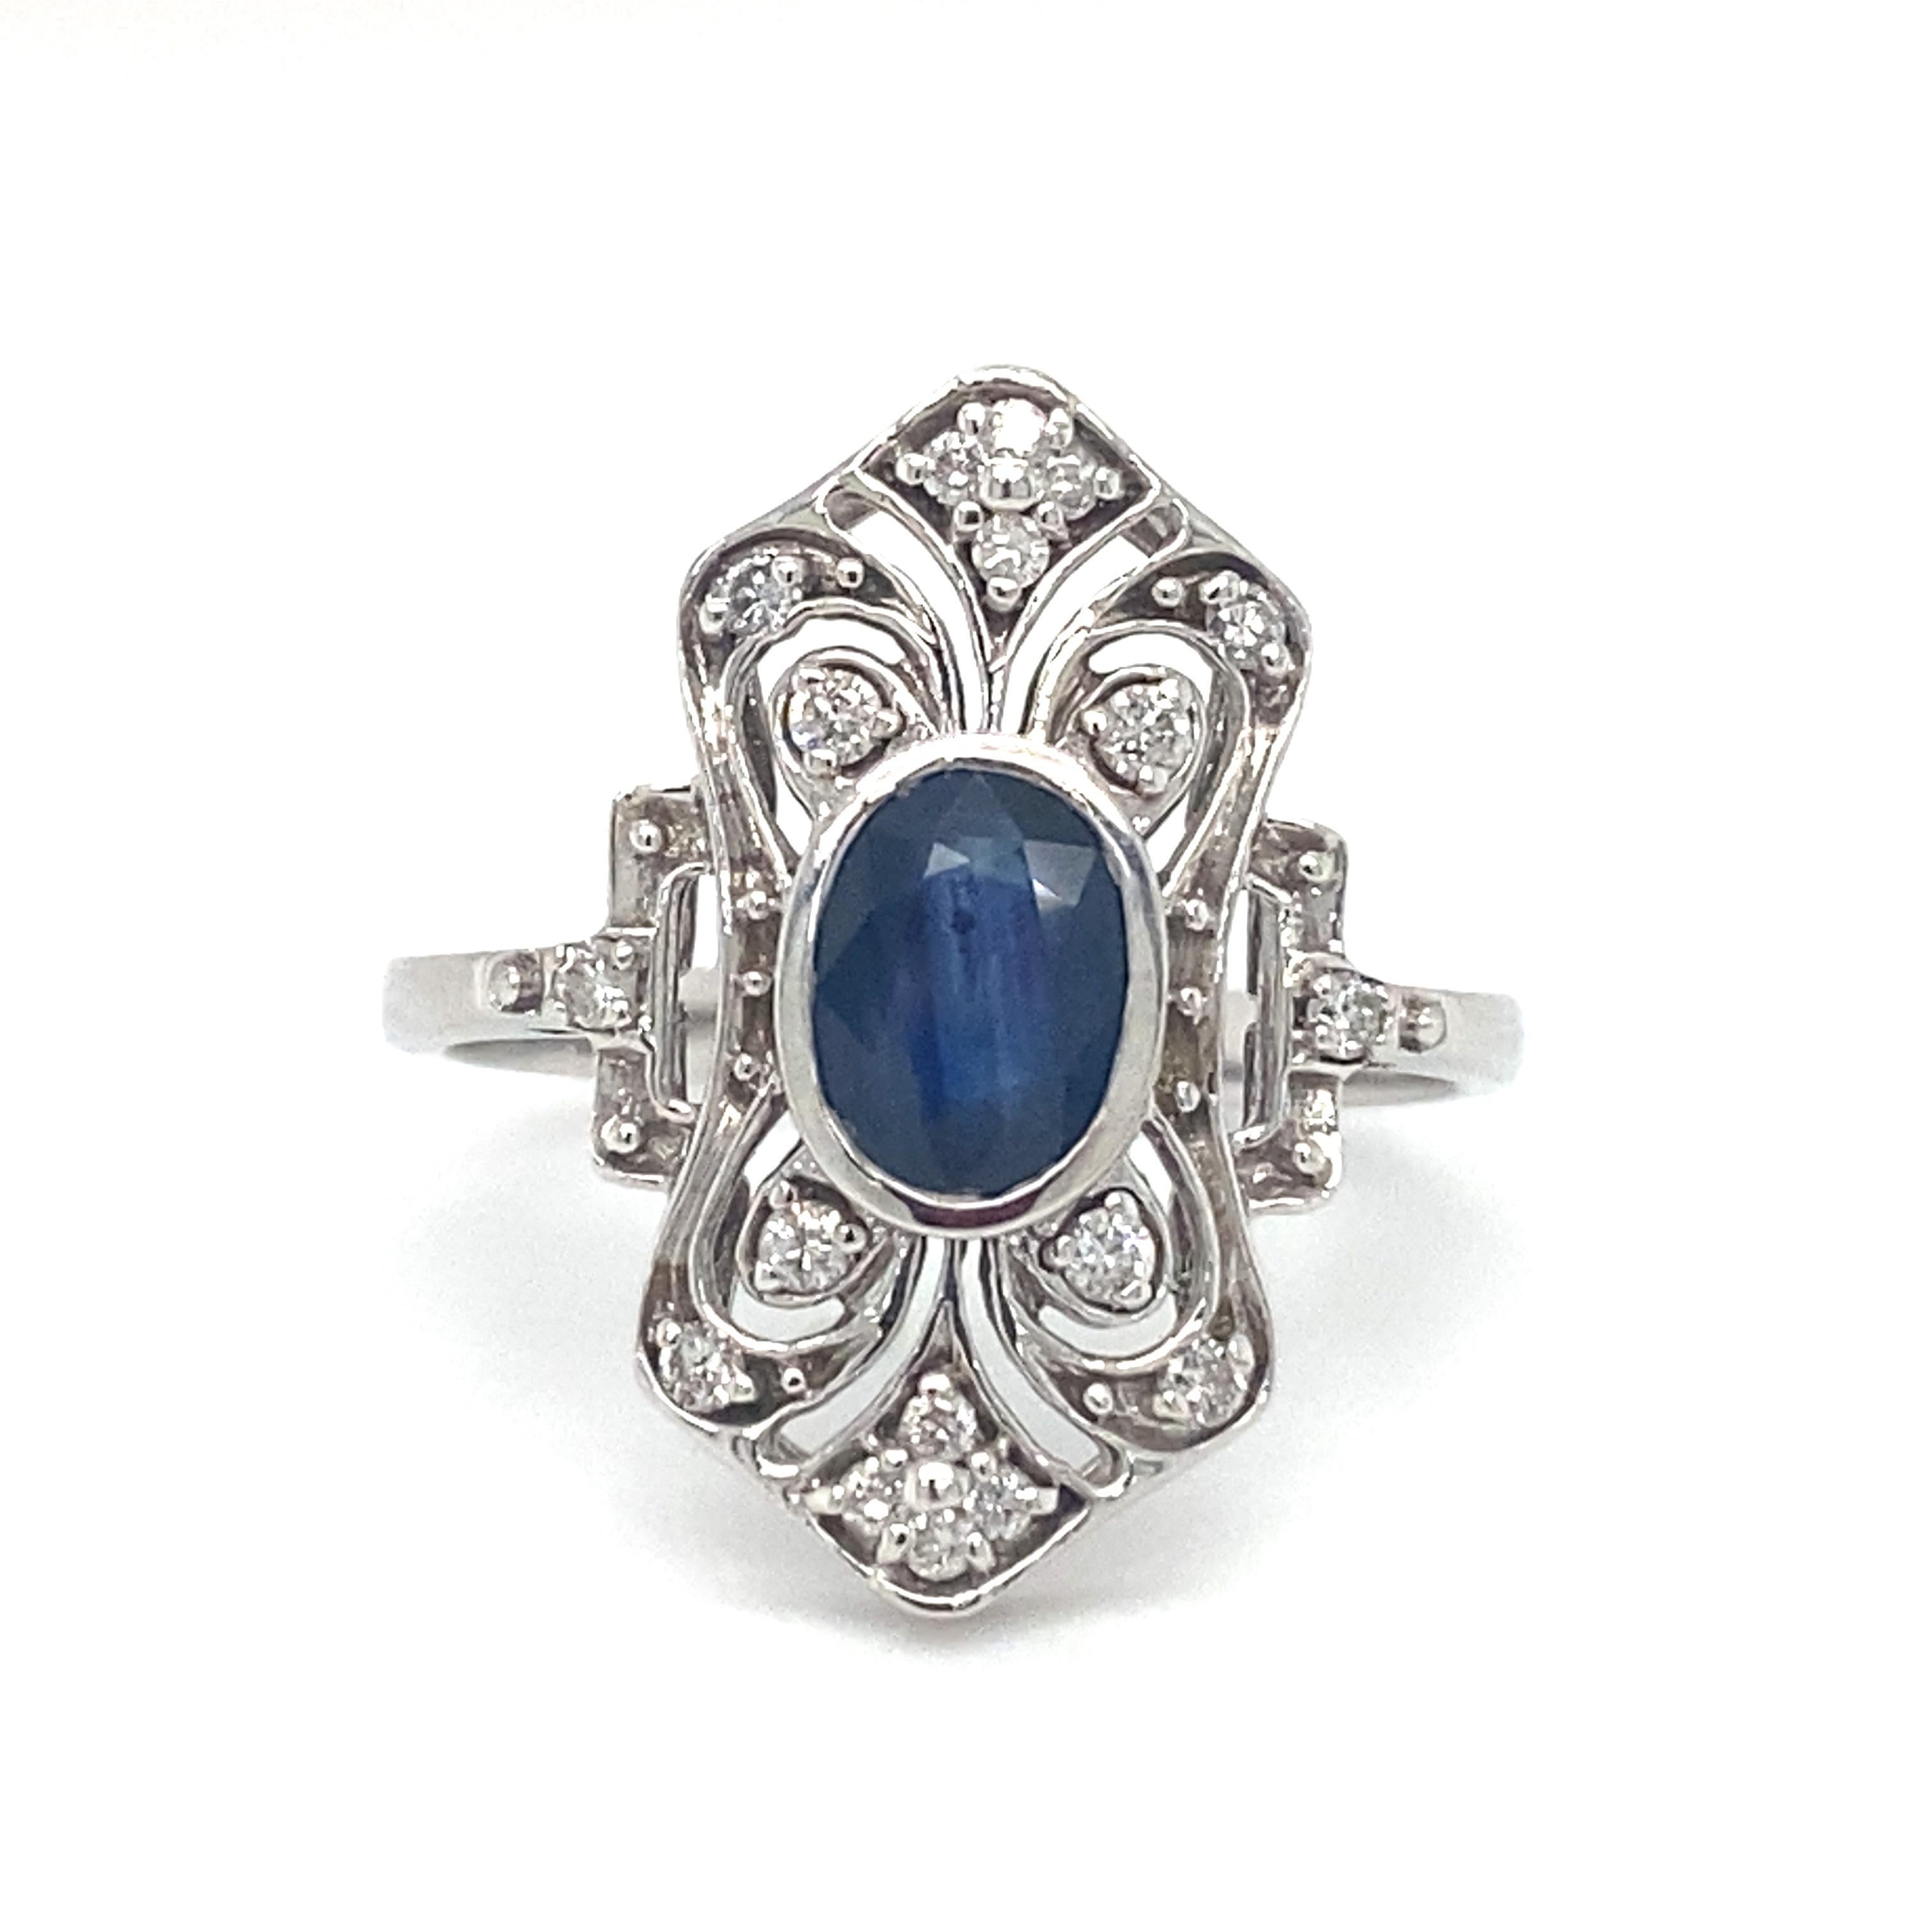 Circa 1950s Art Deco Style Sapphire and Diamond Cocktail Ring in 14K White Gold For Sale 1